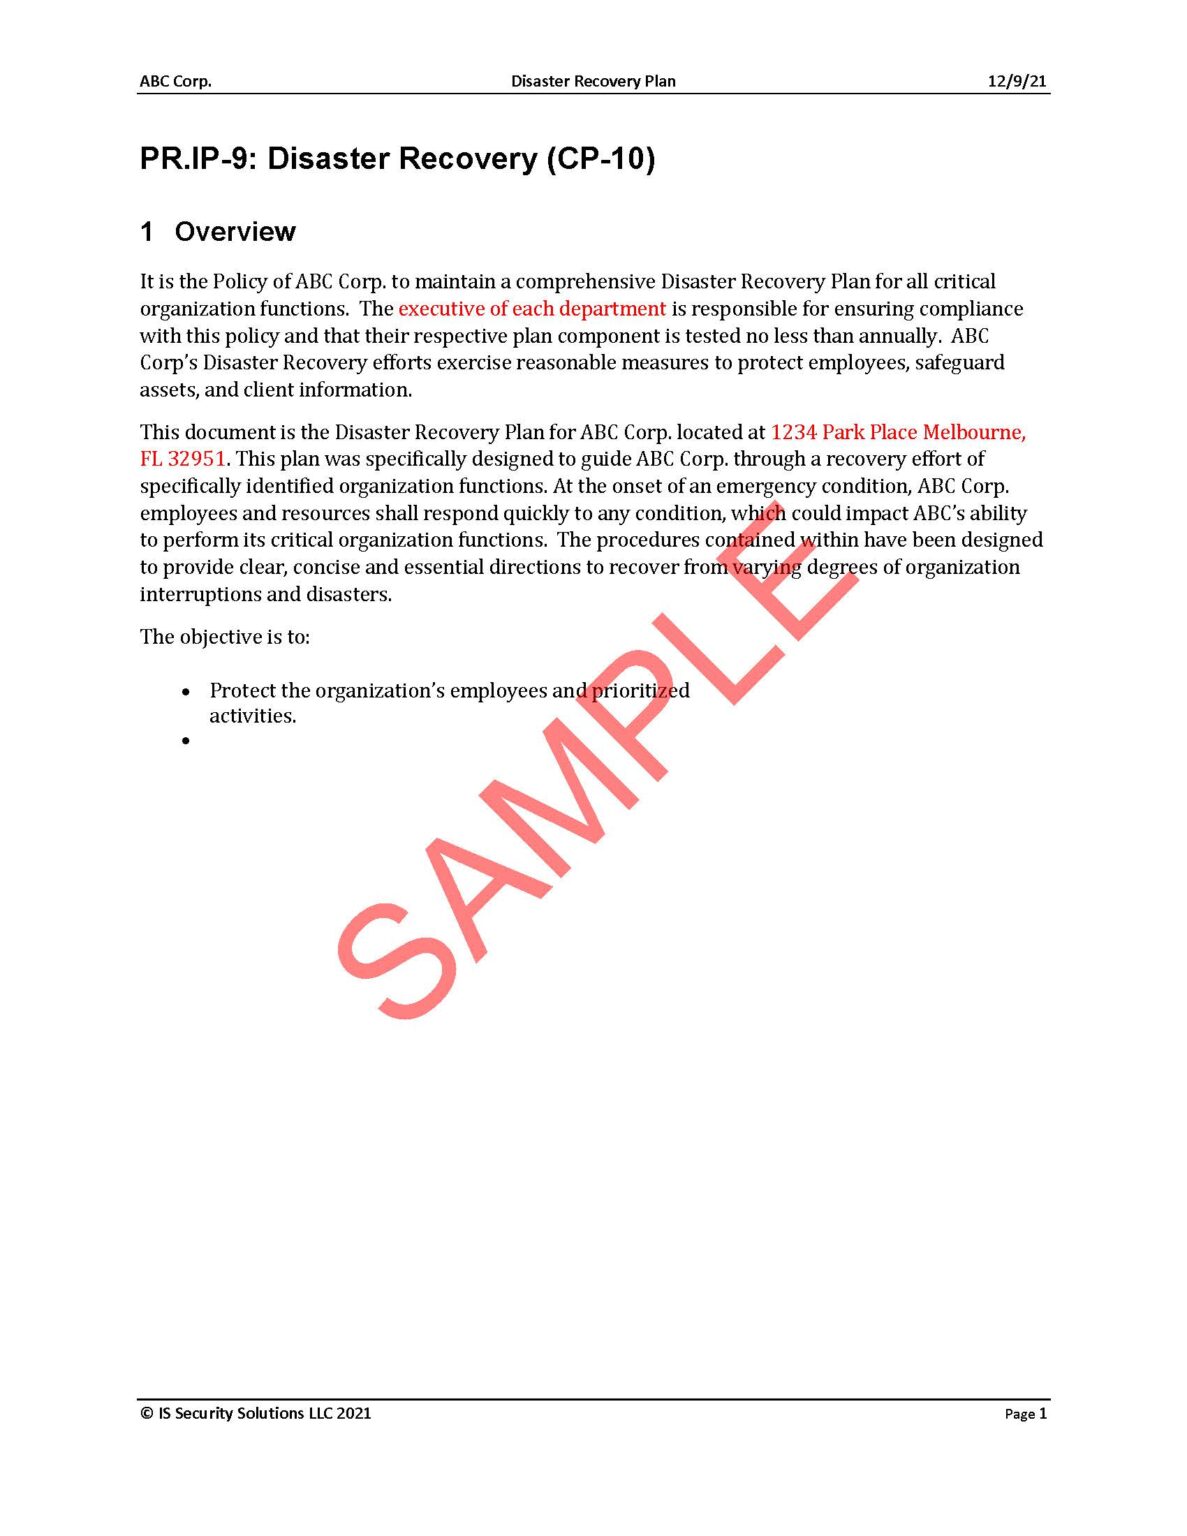 Disaster Recovery Plan and Impact Analysis Template NIST CP10 Buy